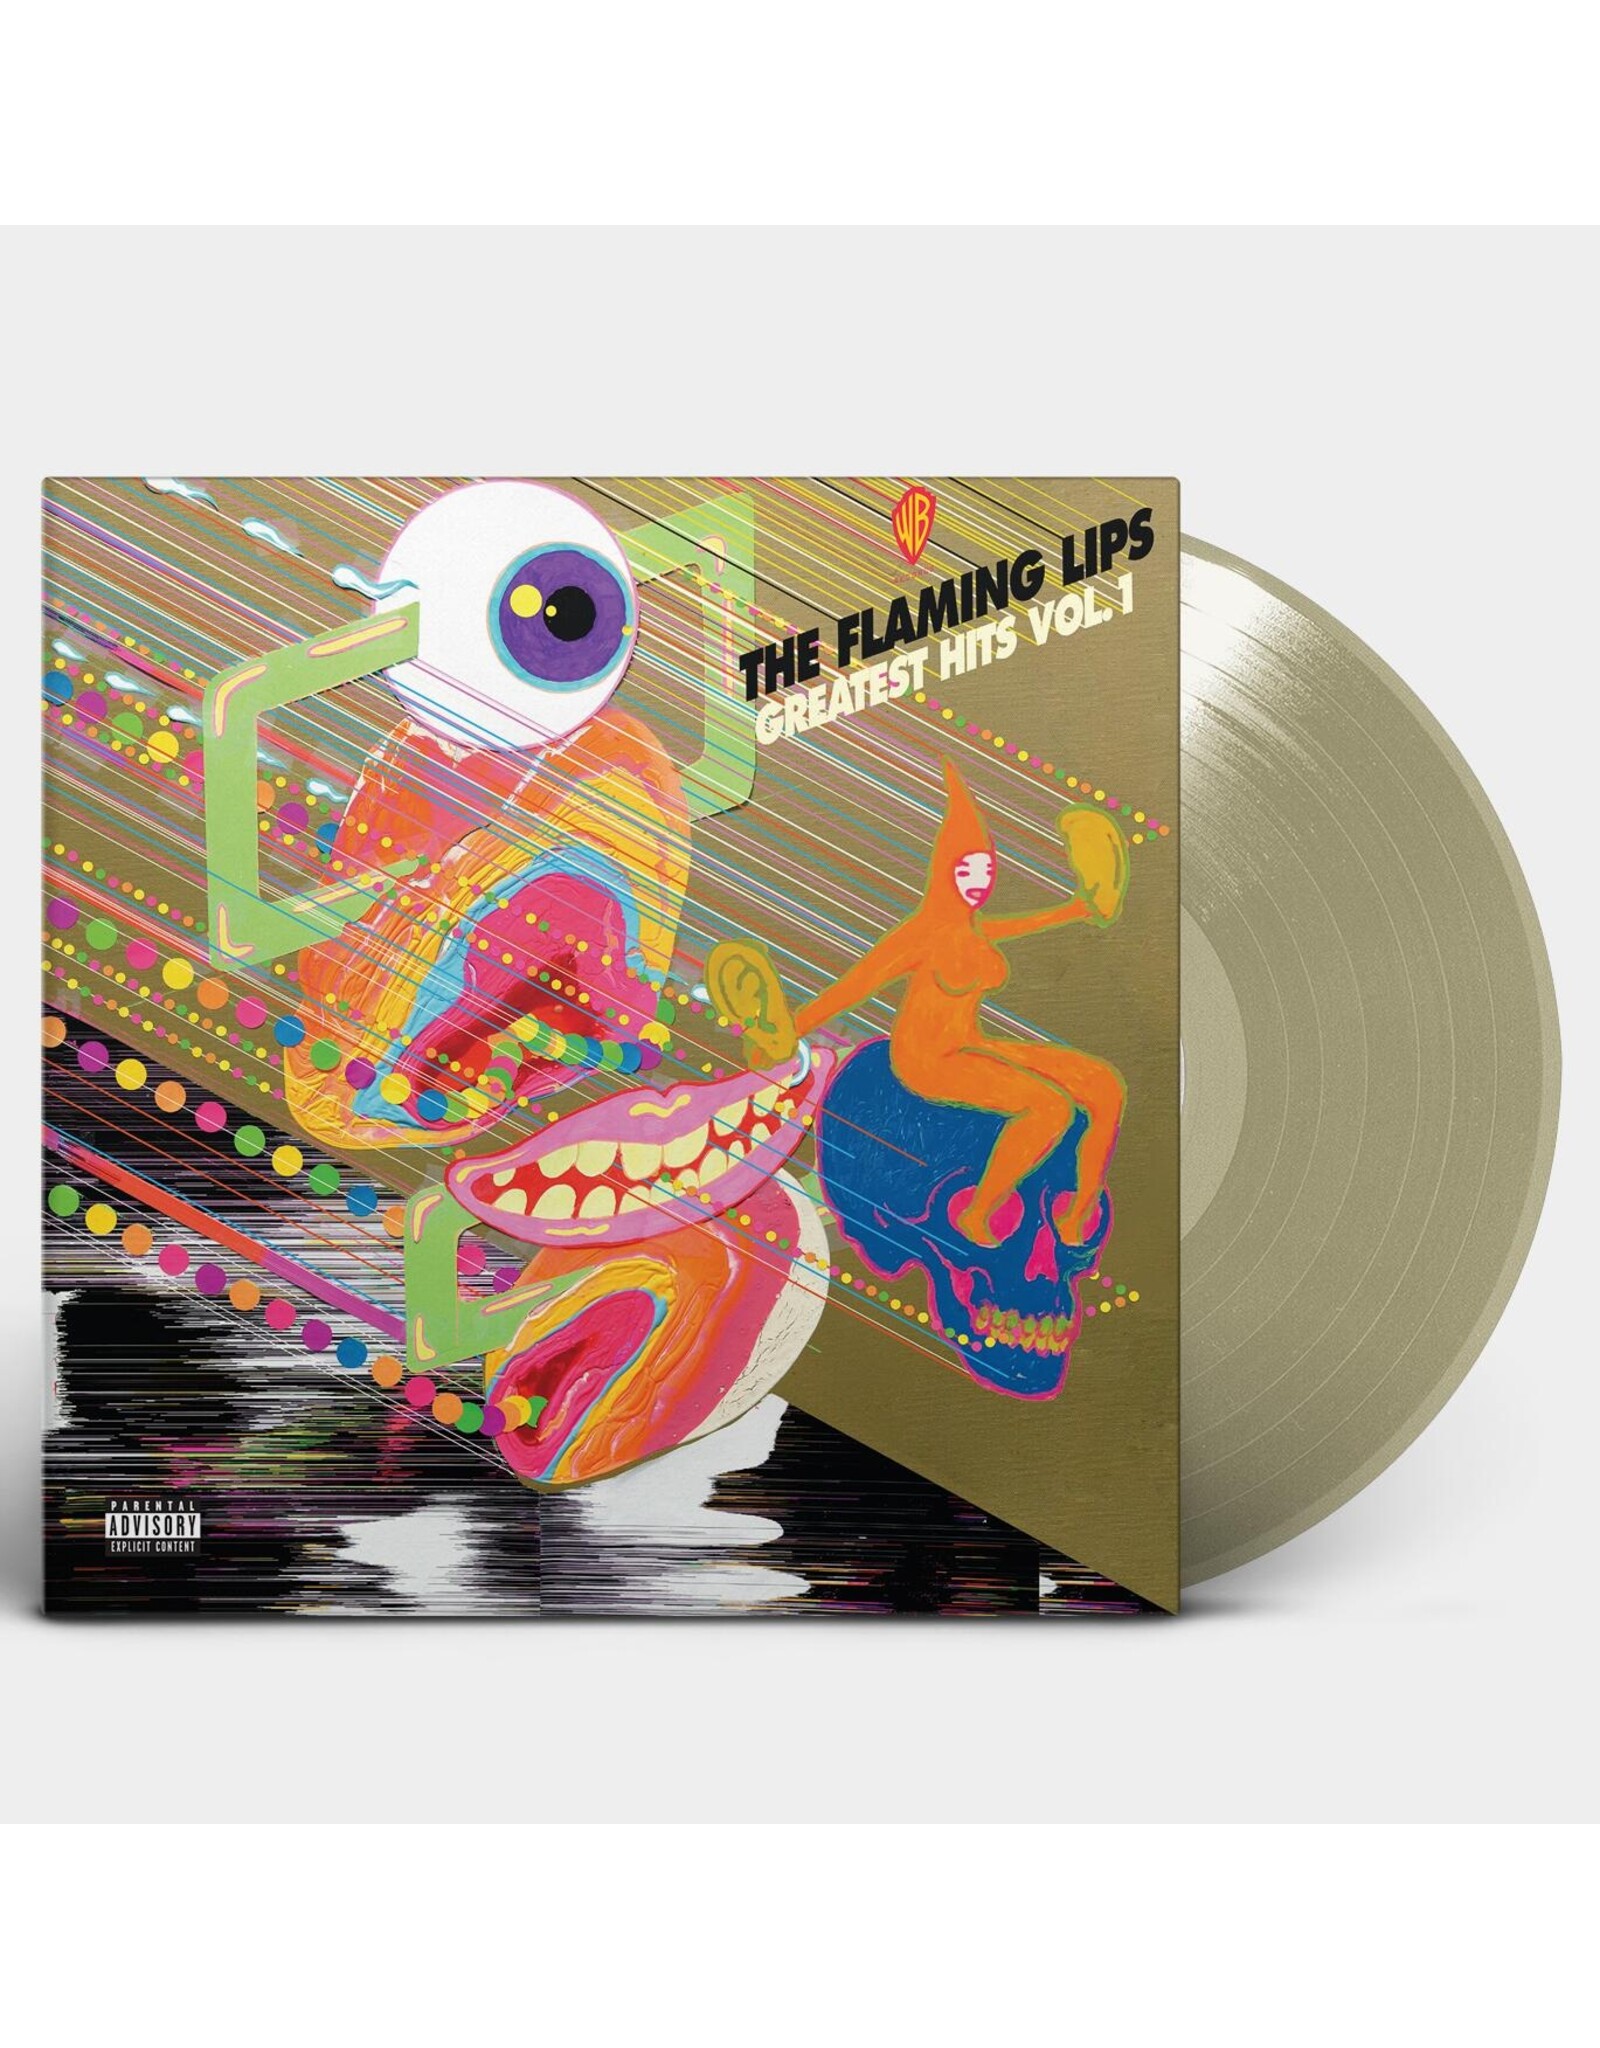 Flaming Lips - Greatest Hits Vol. 1 (Exclusive Gold Vinyl)